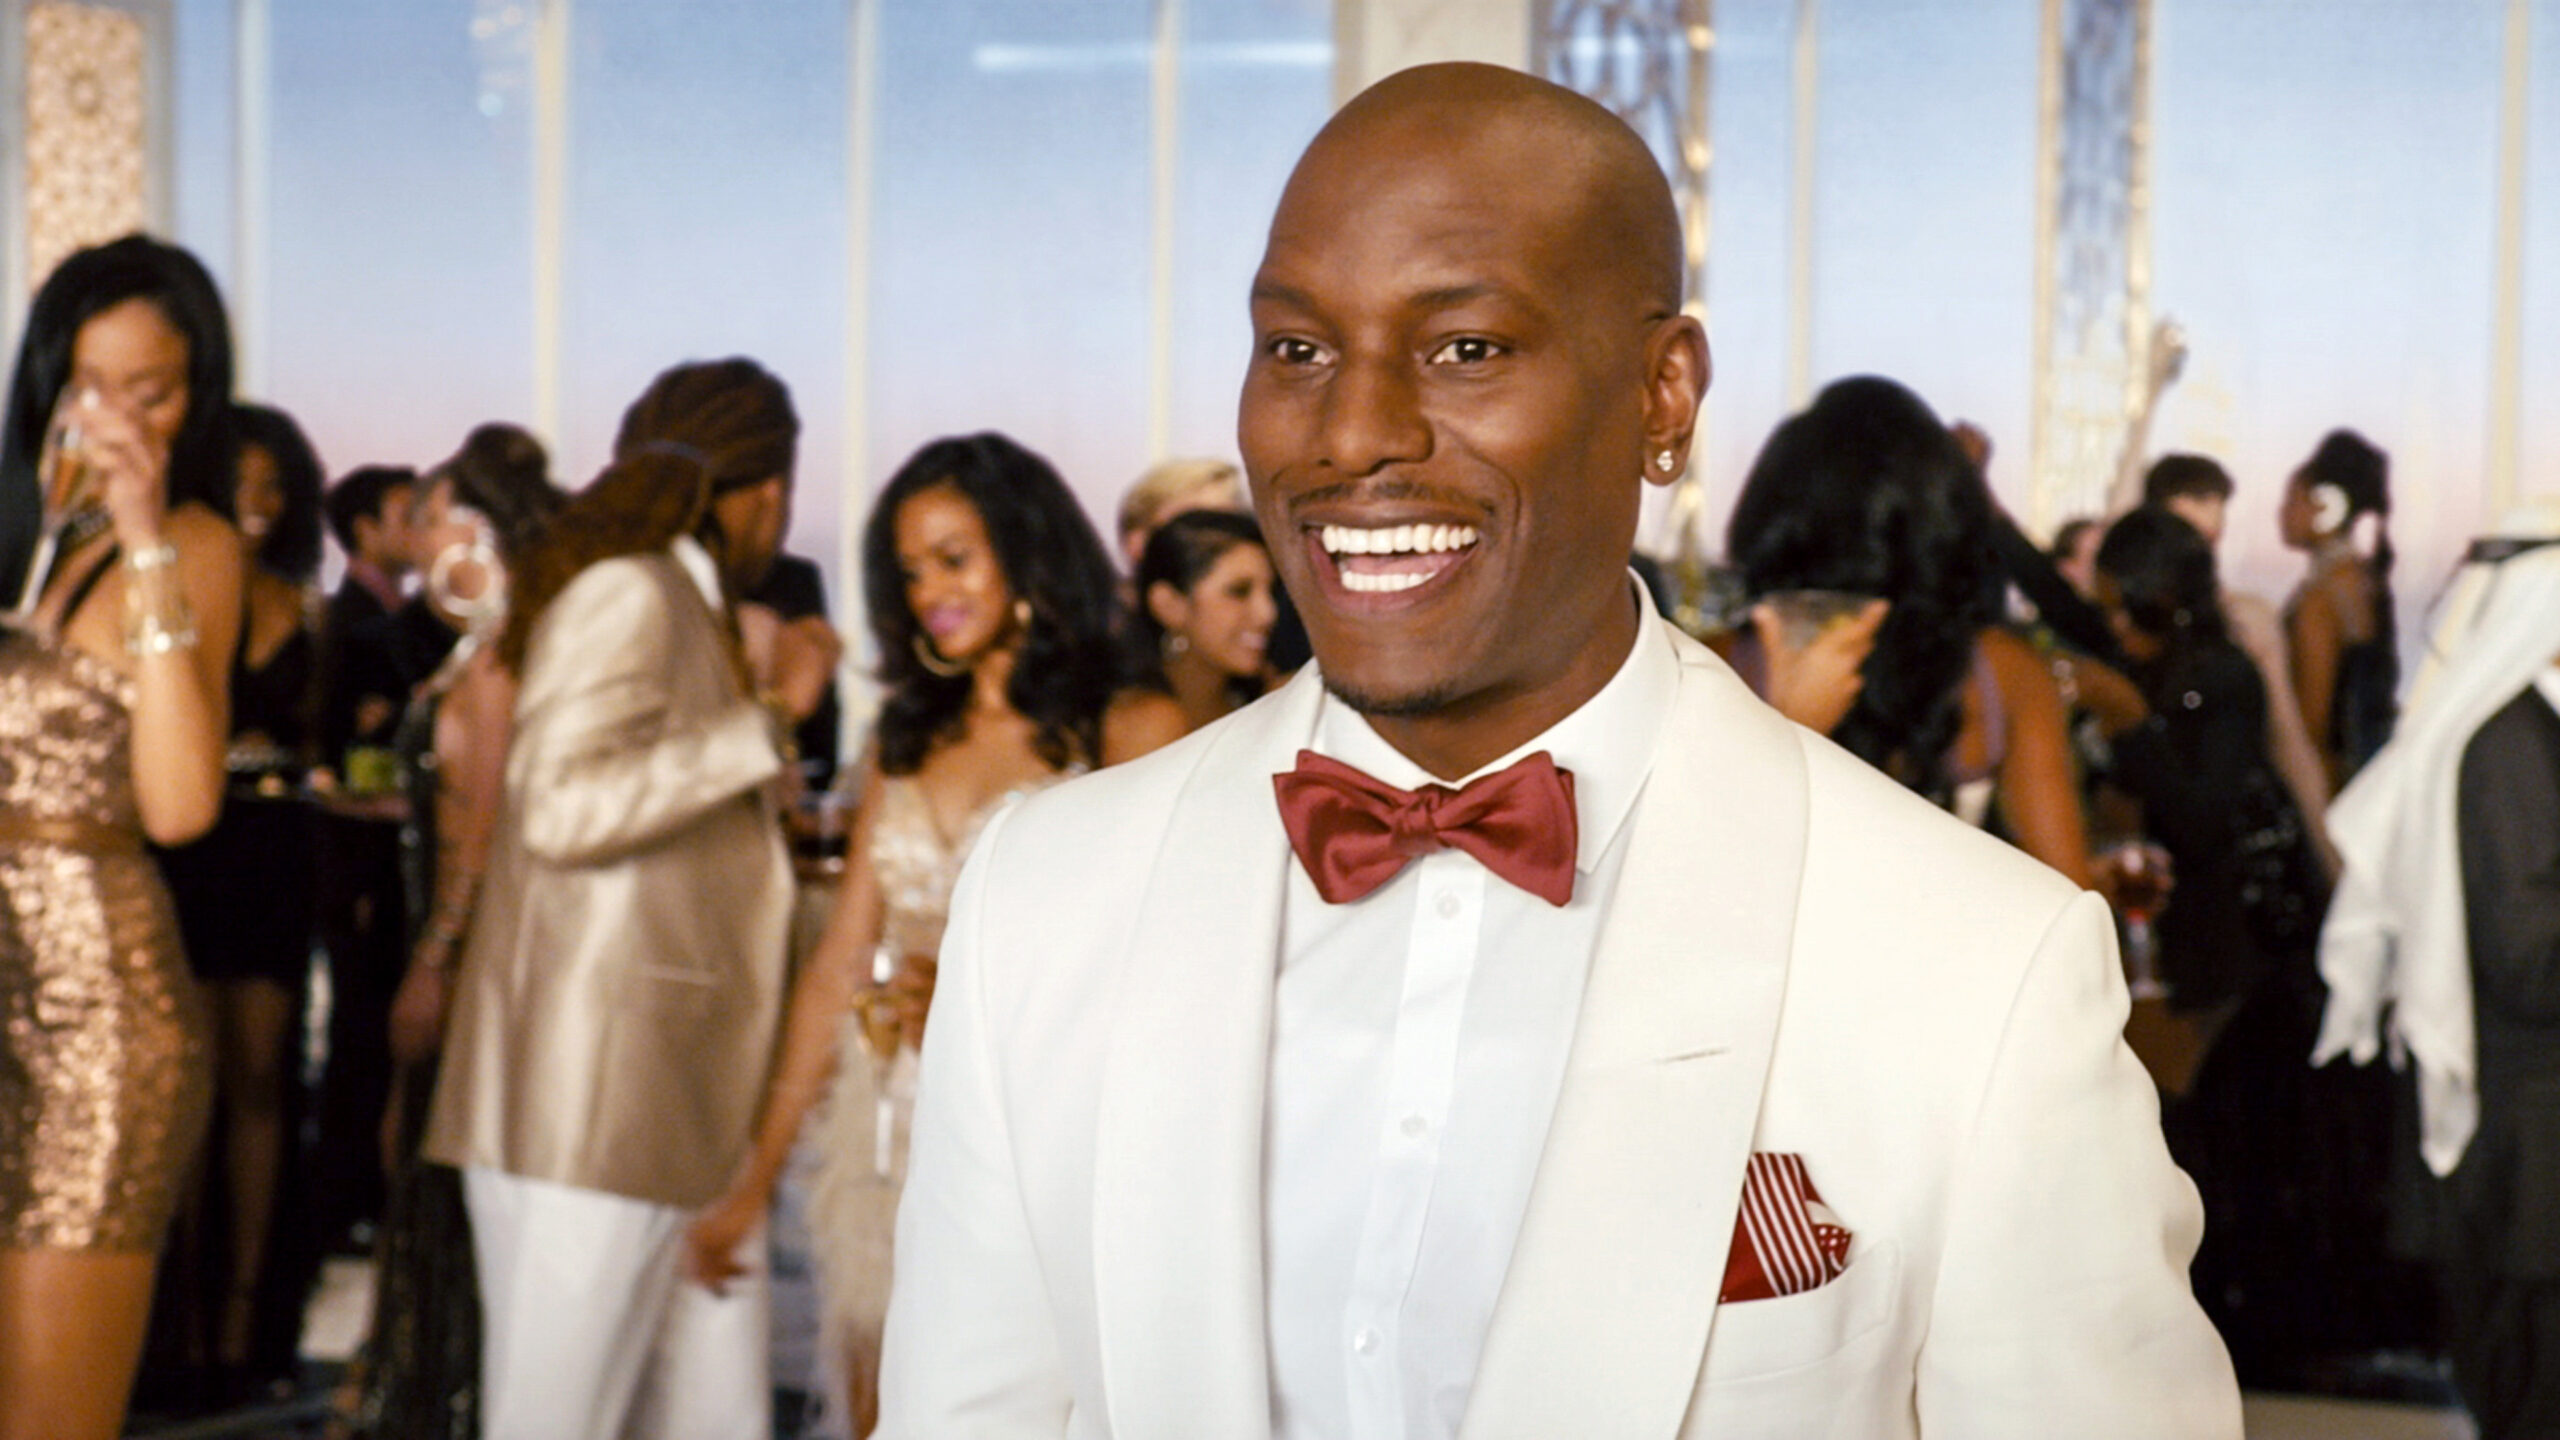 Roman Pearce Tyrese Gibson With White Dress K 2K Fast And Furious